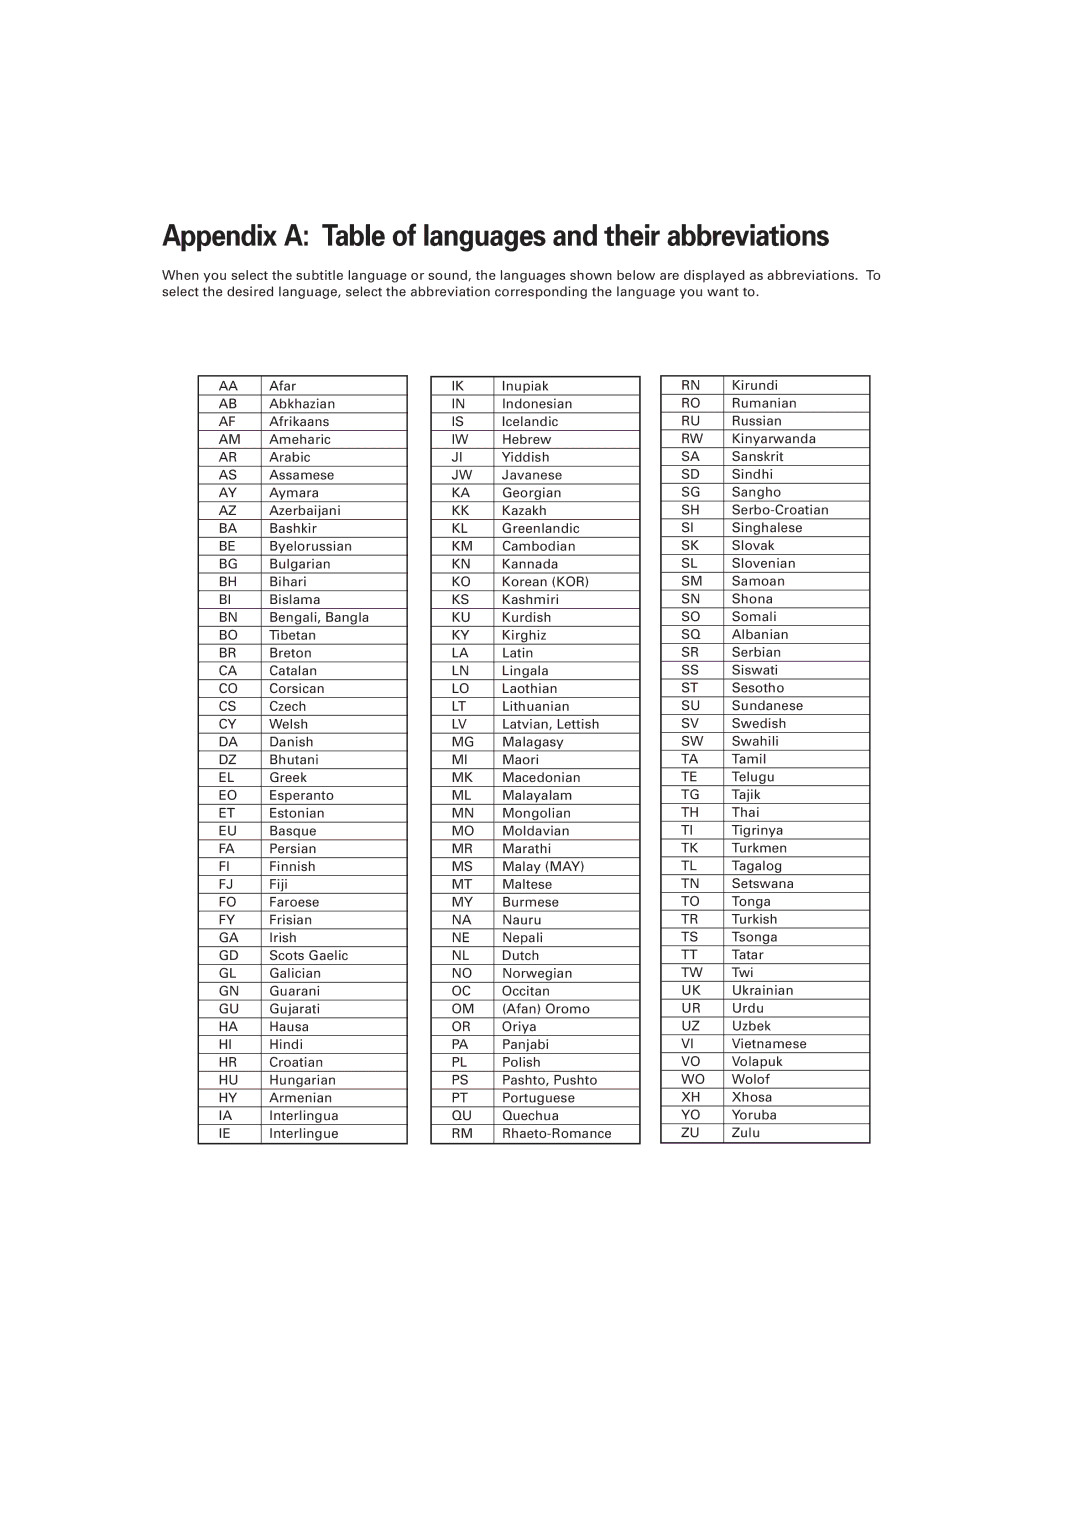 JVC XV-D701BK manual Appendix a Table of languages and their abbreviations 